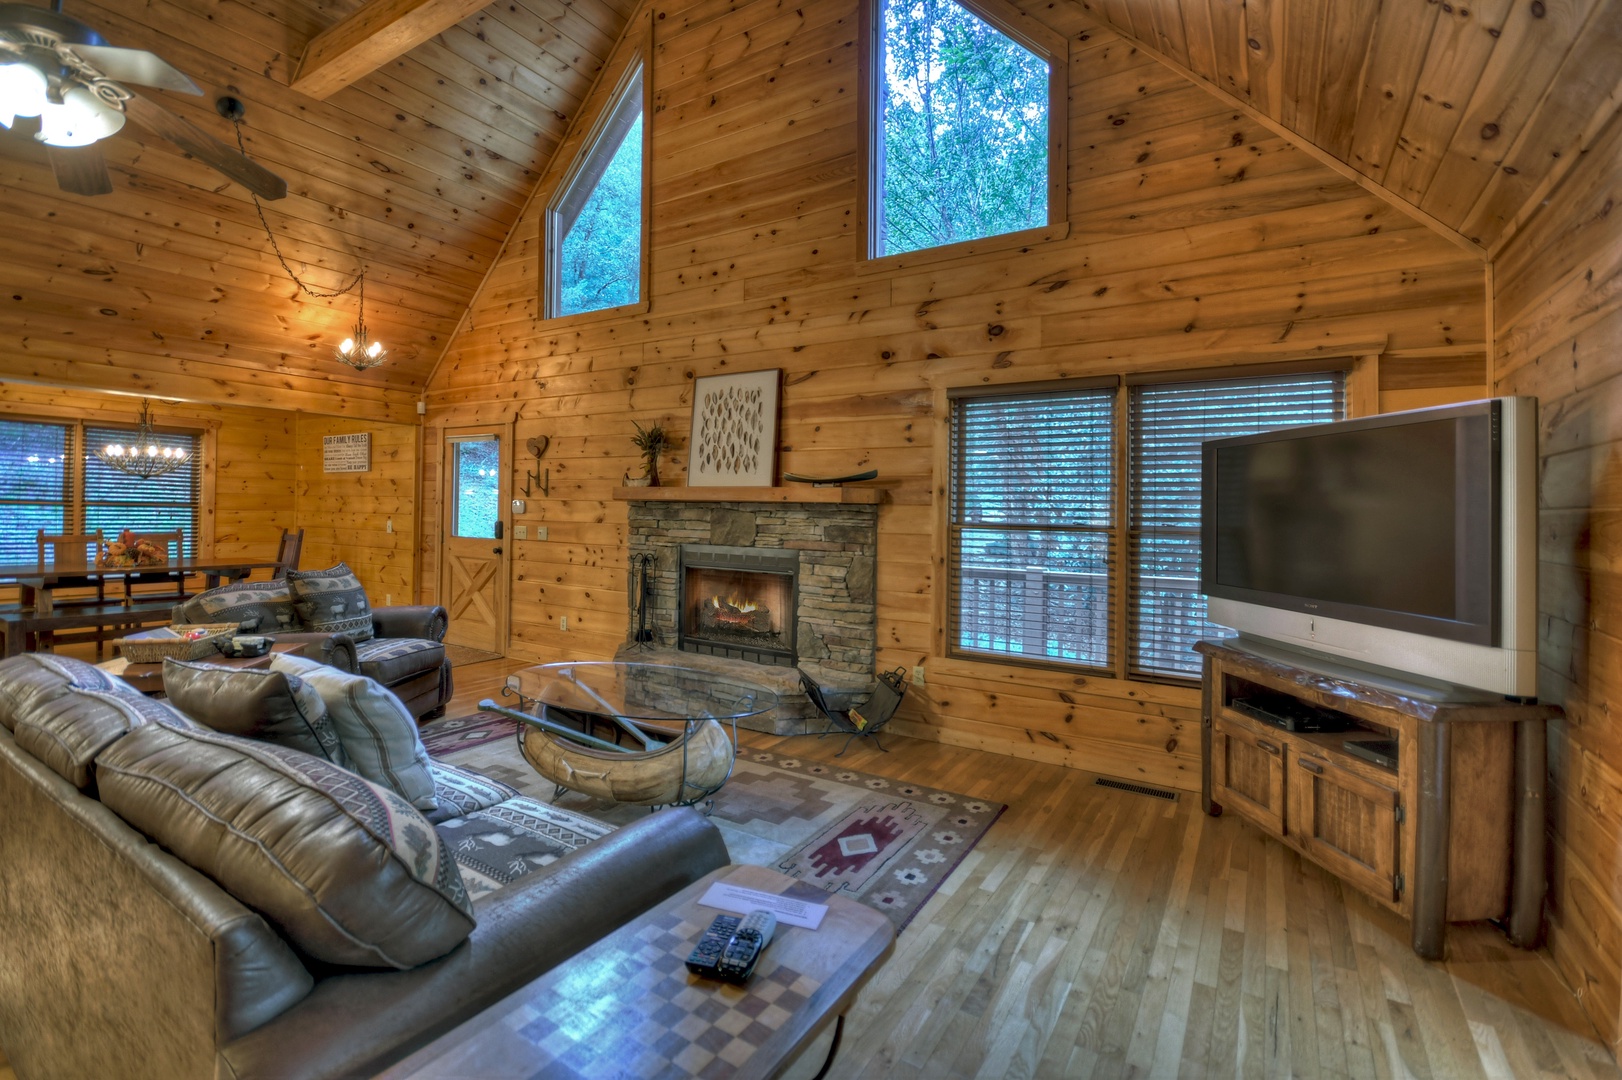 Hogback Haven- Living room area with rustic decor